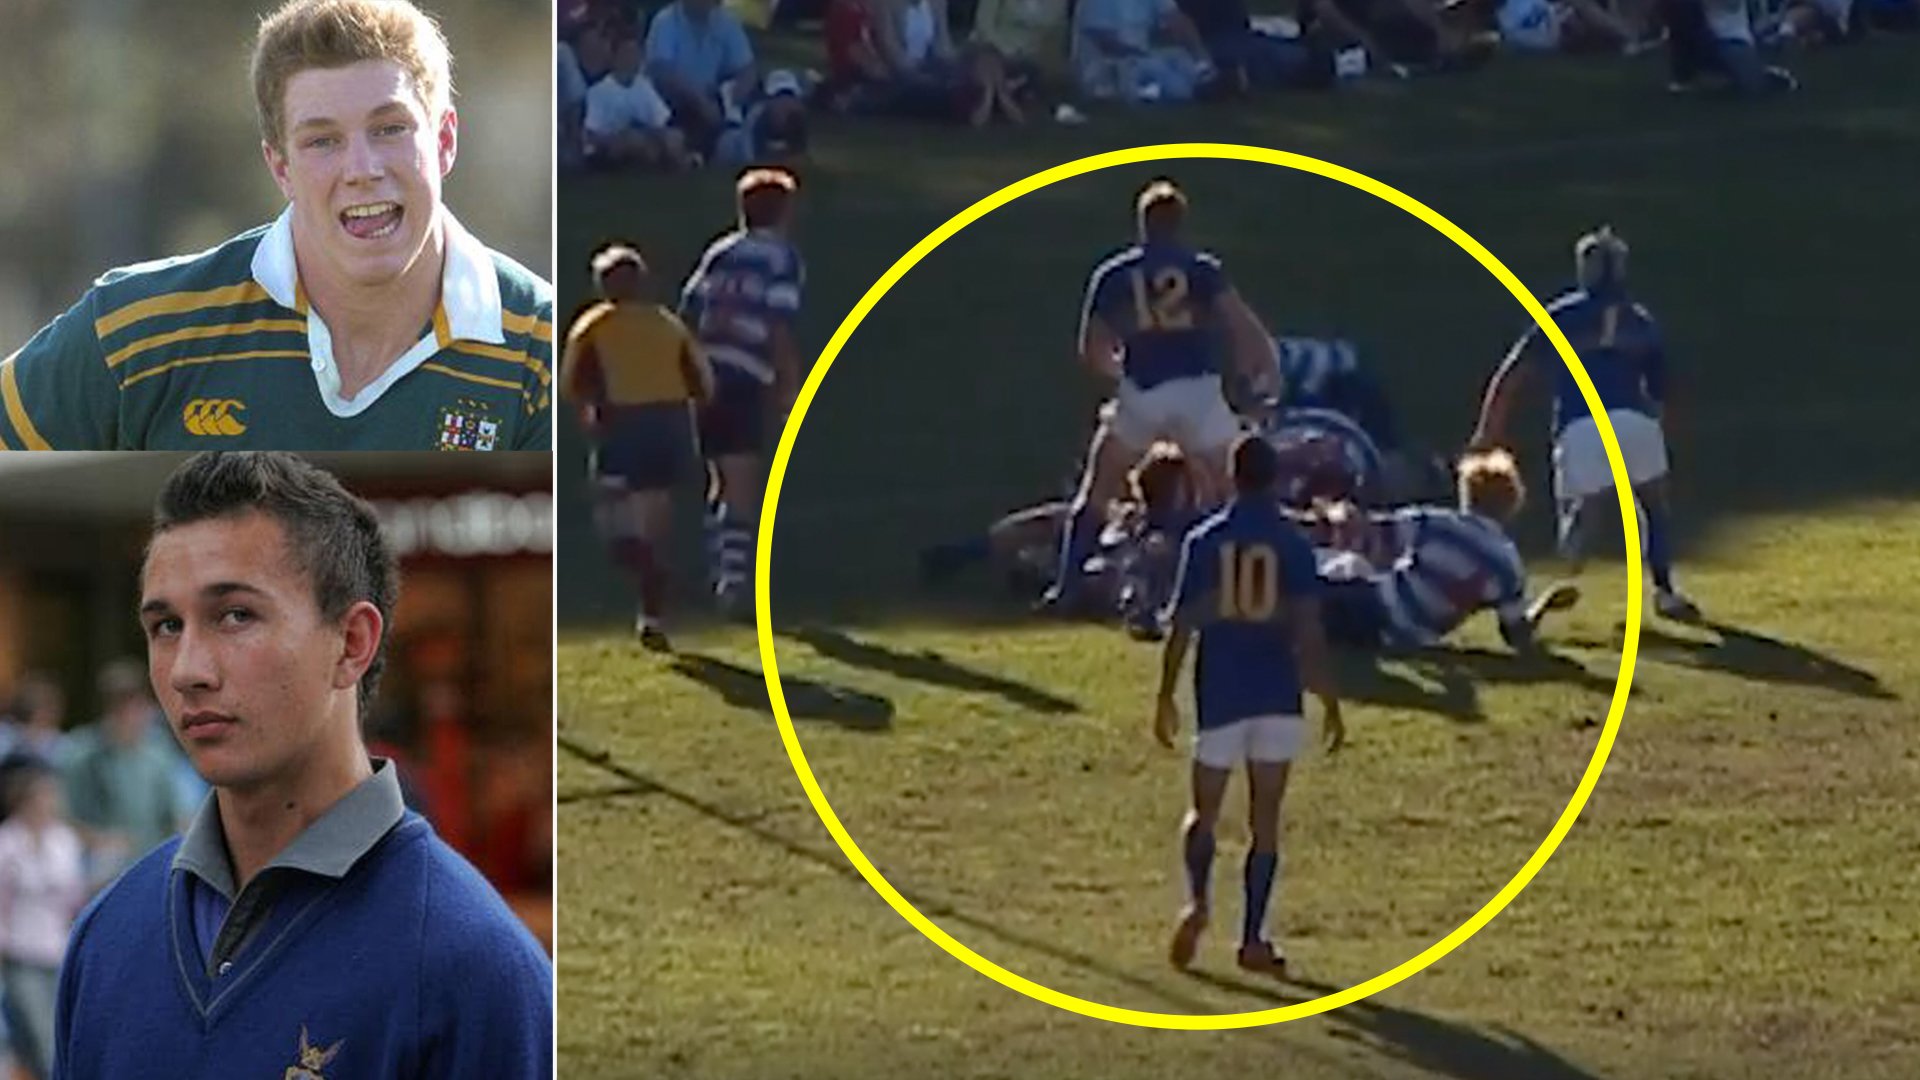 Video emerges of Quade Cooper and David Pocock playing at 10 and 12 together at school - Insane combination